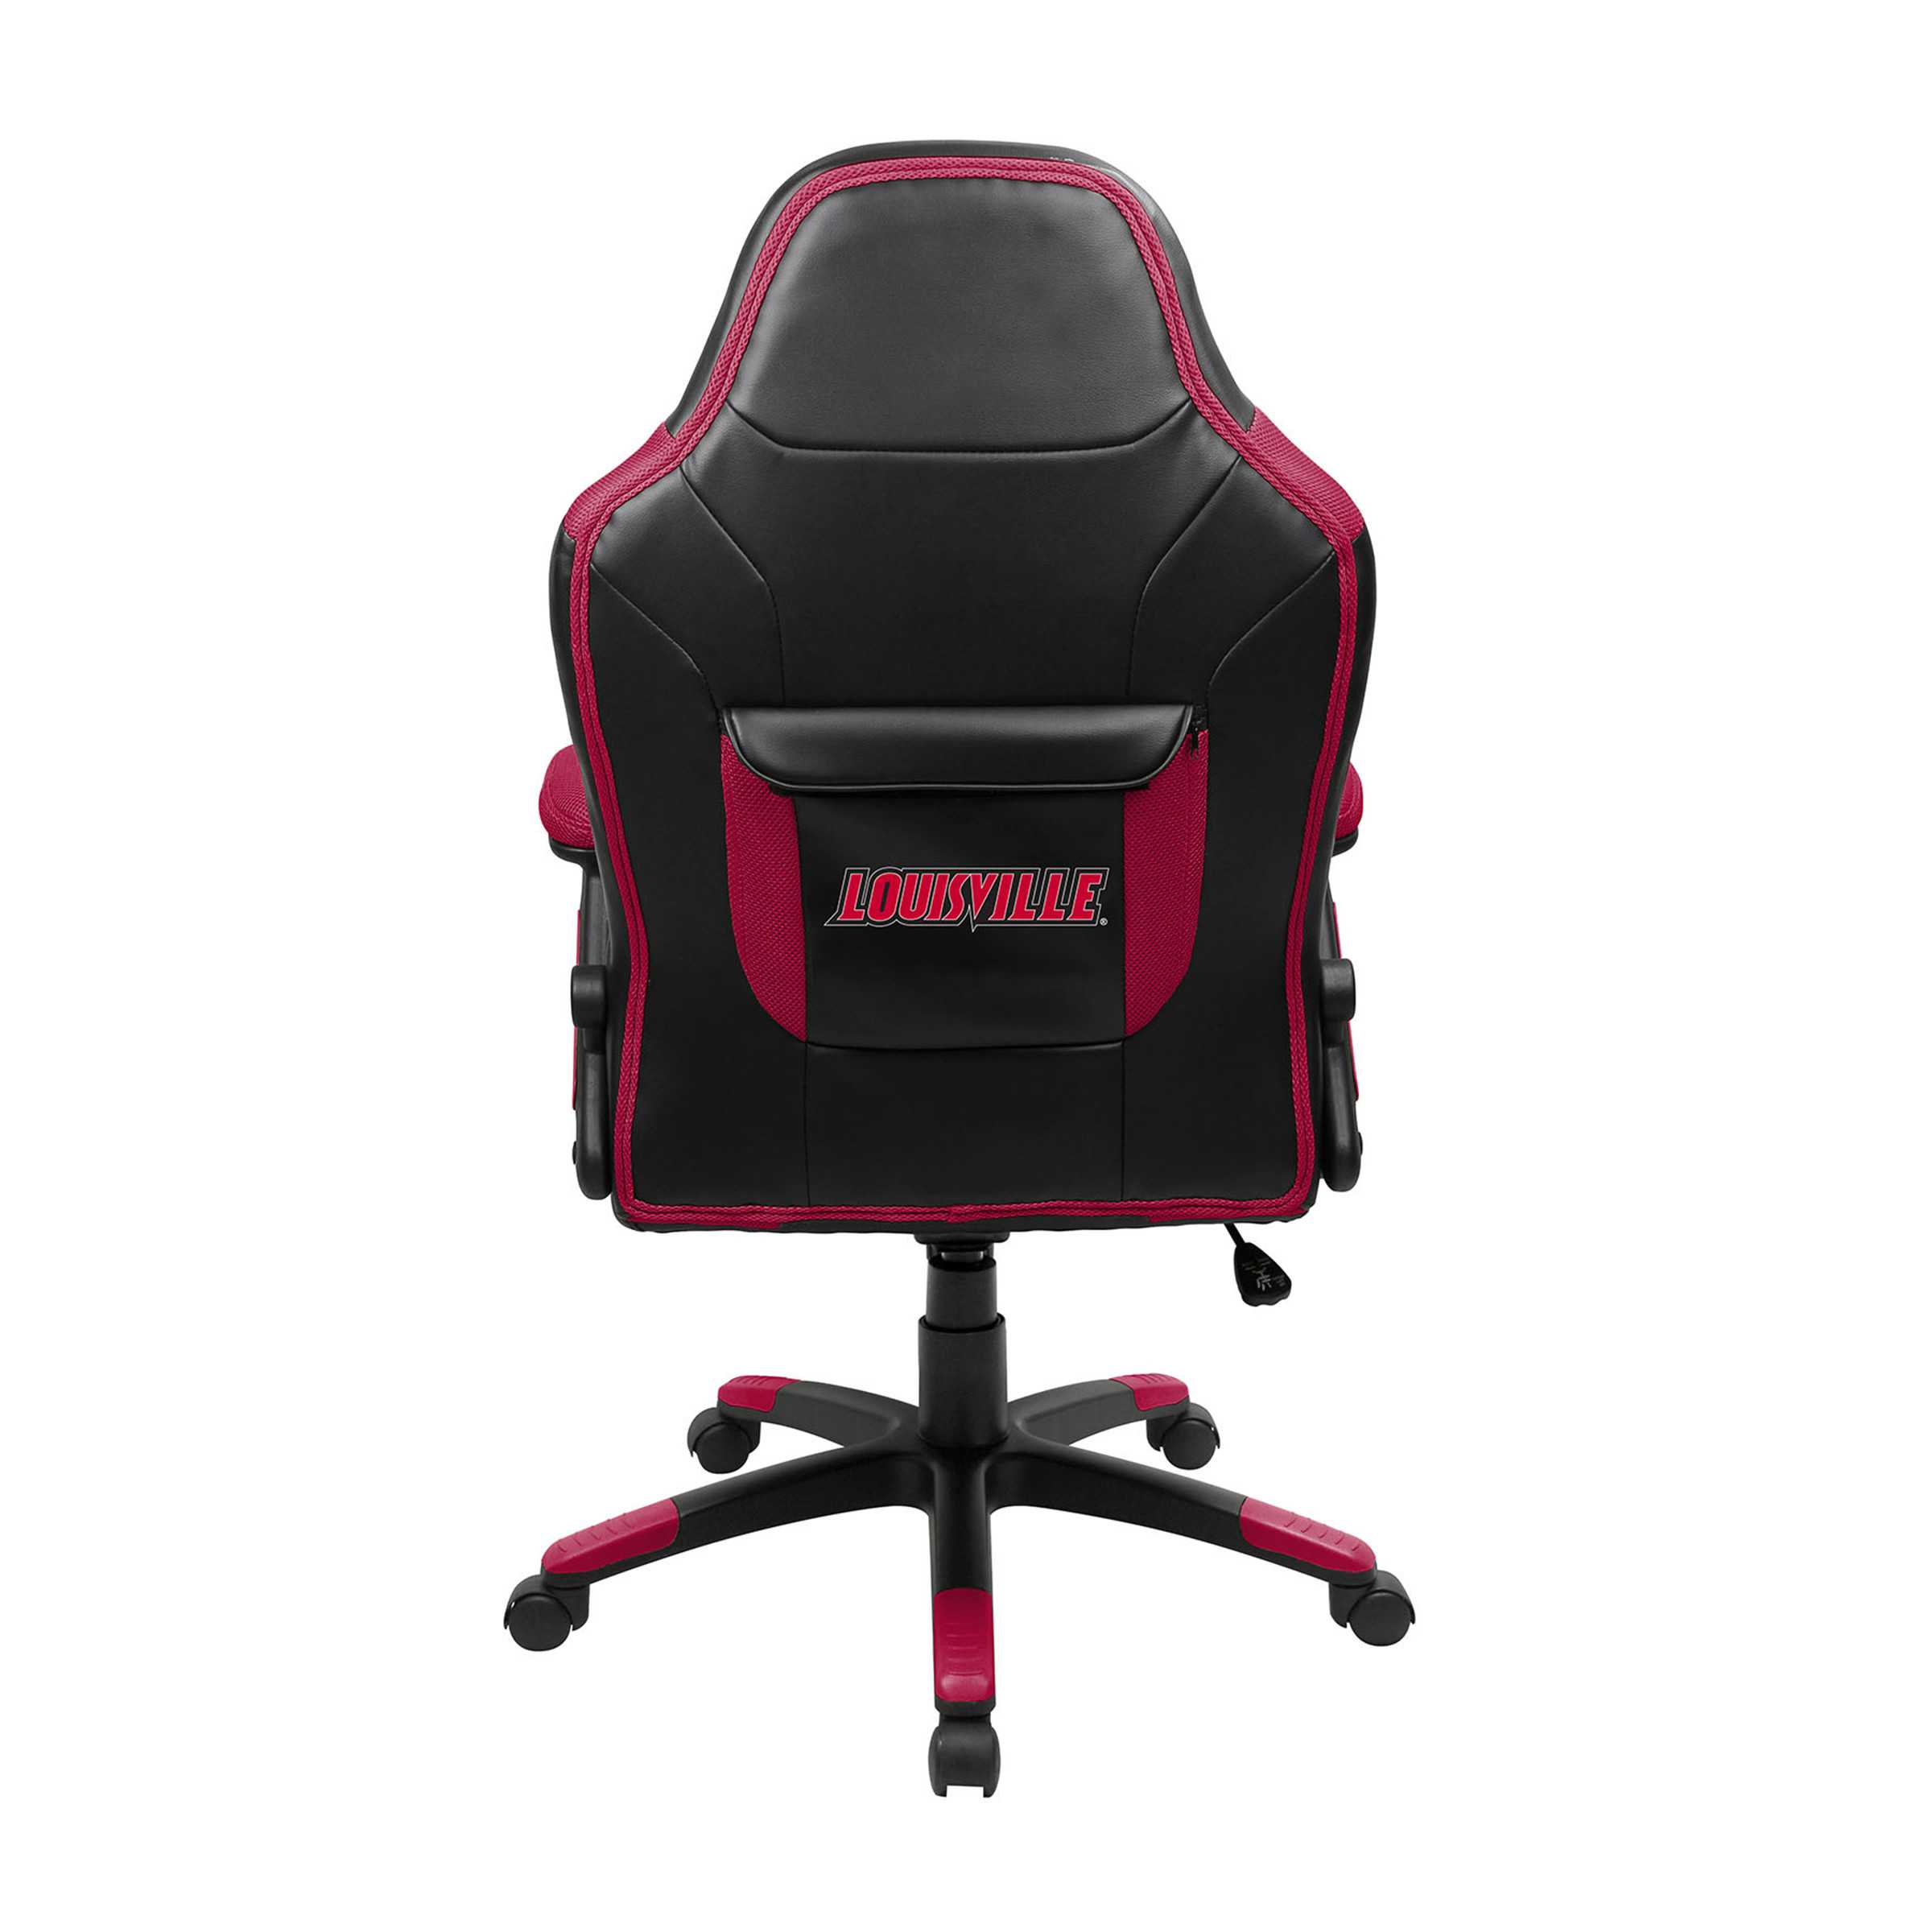 UNIVERSITY OF LOUISVILLE OVERSIZED GAMING CHAIR